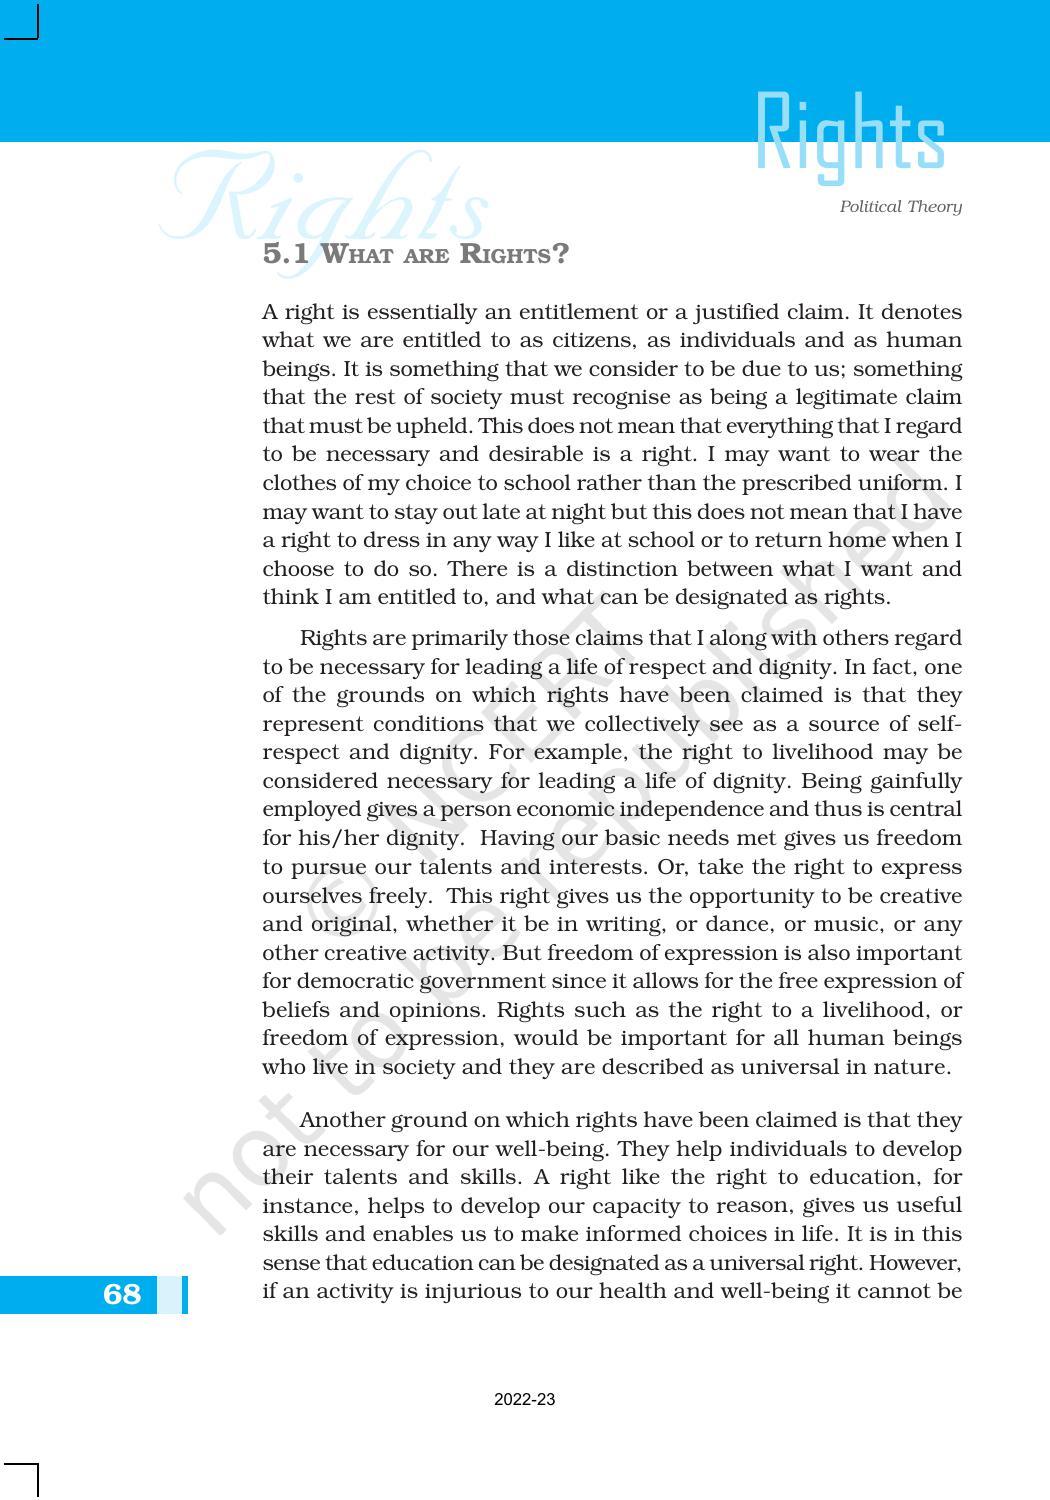 NCERT Book for Class 11 Political Science (Political Theory) Chapter 5 Rights - Page 2